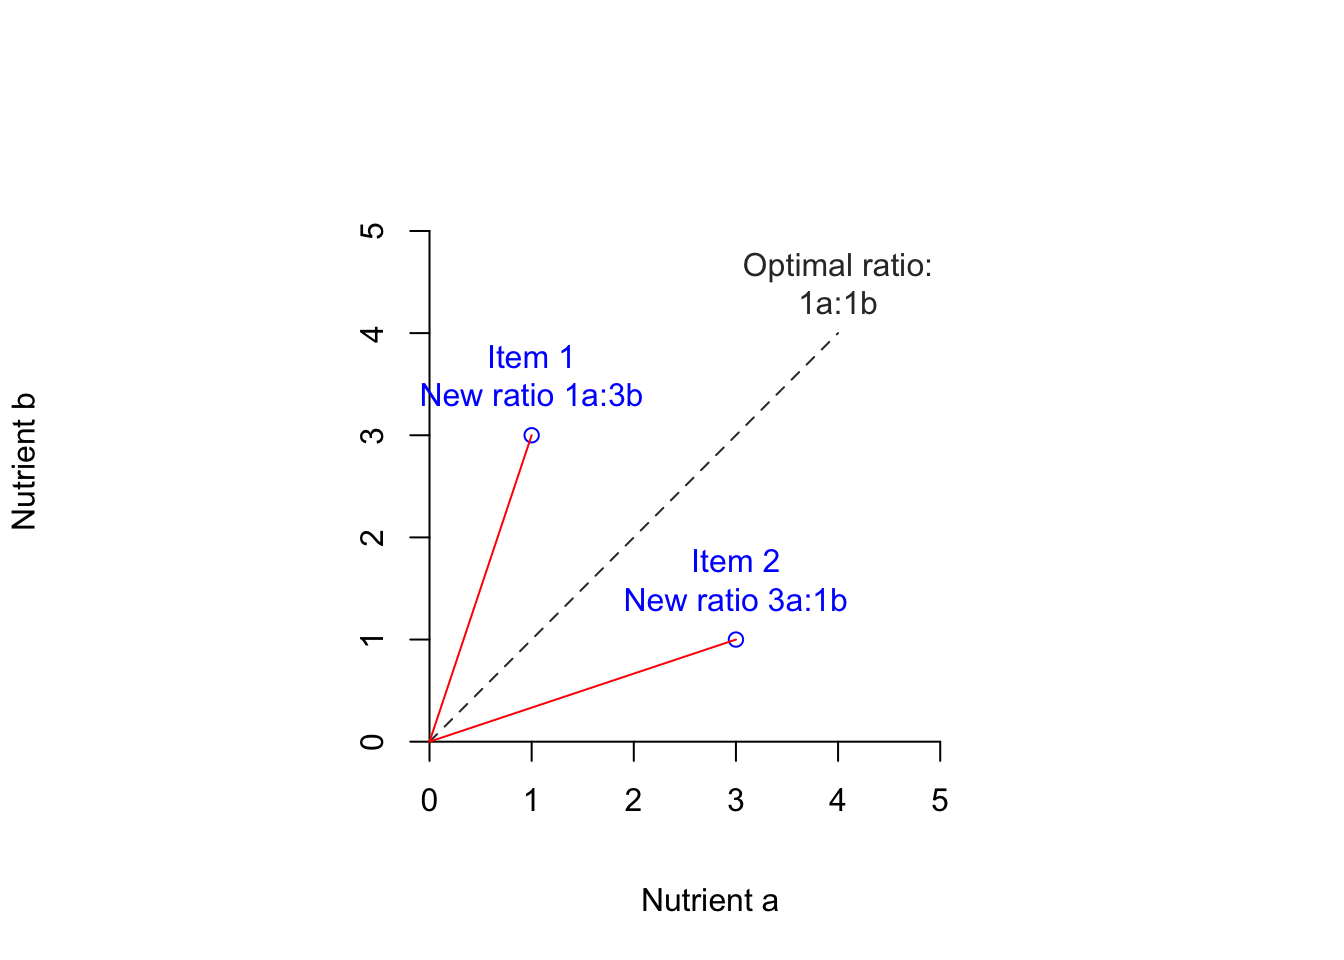 Potential deviation from optimal nutrient ratio when consuming different food items.